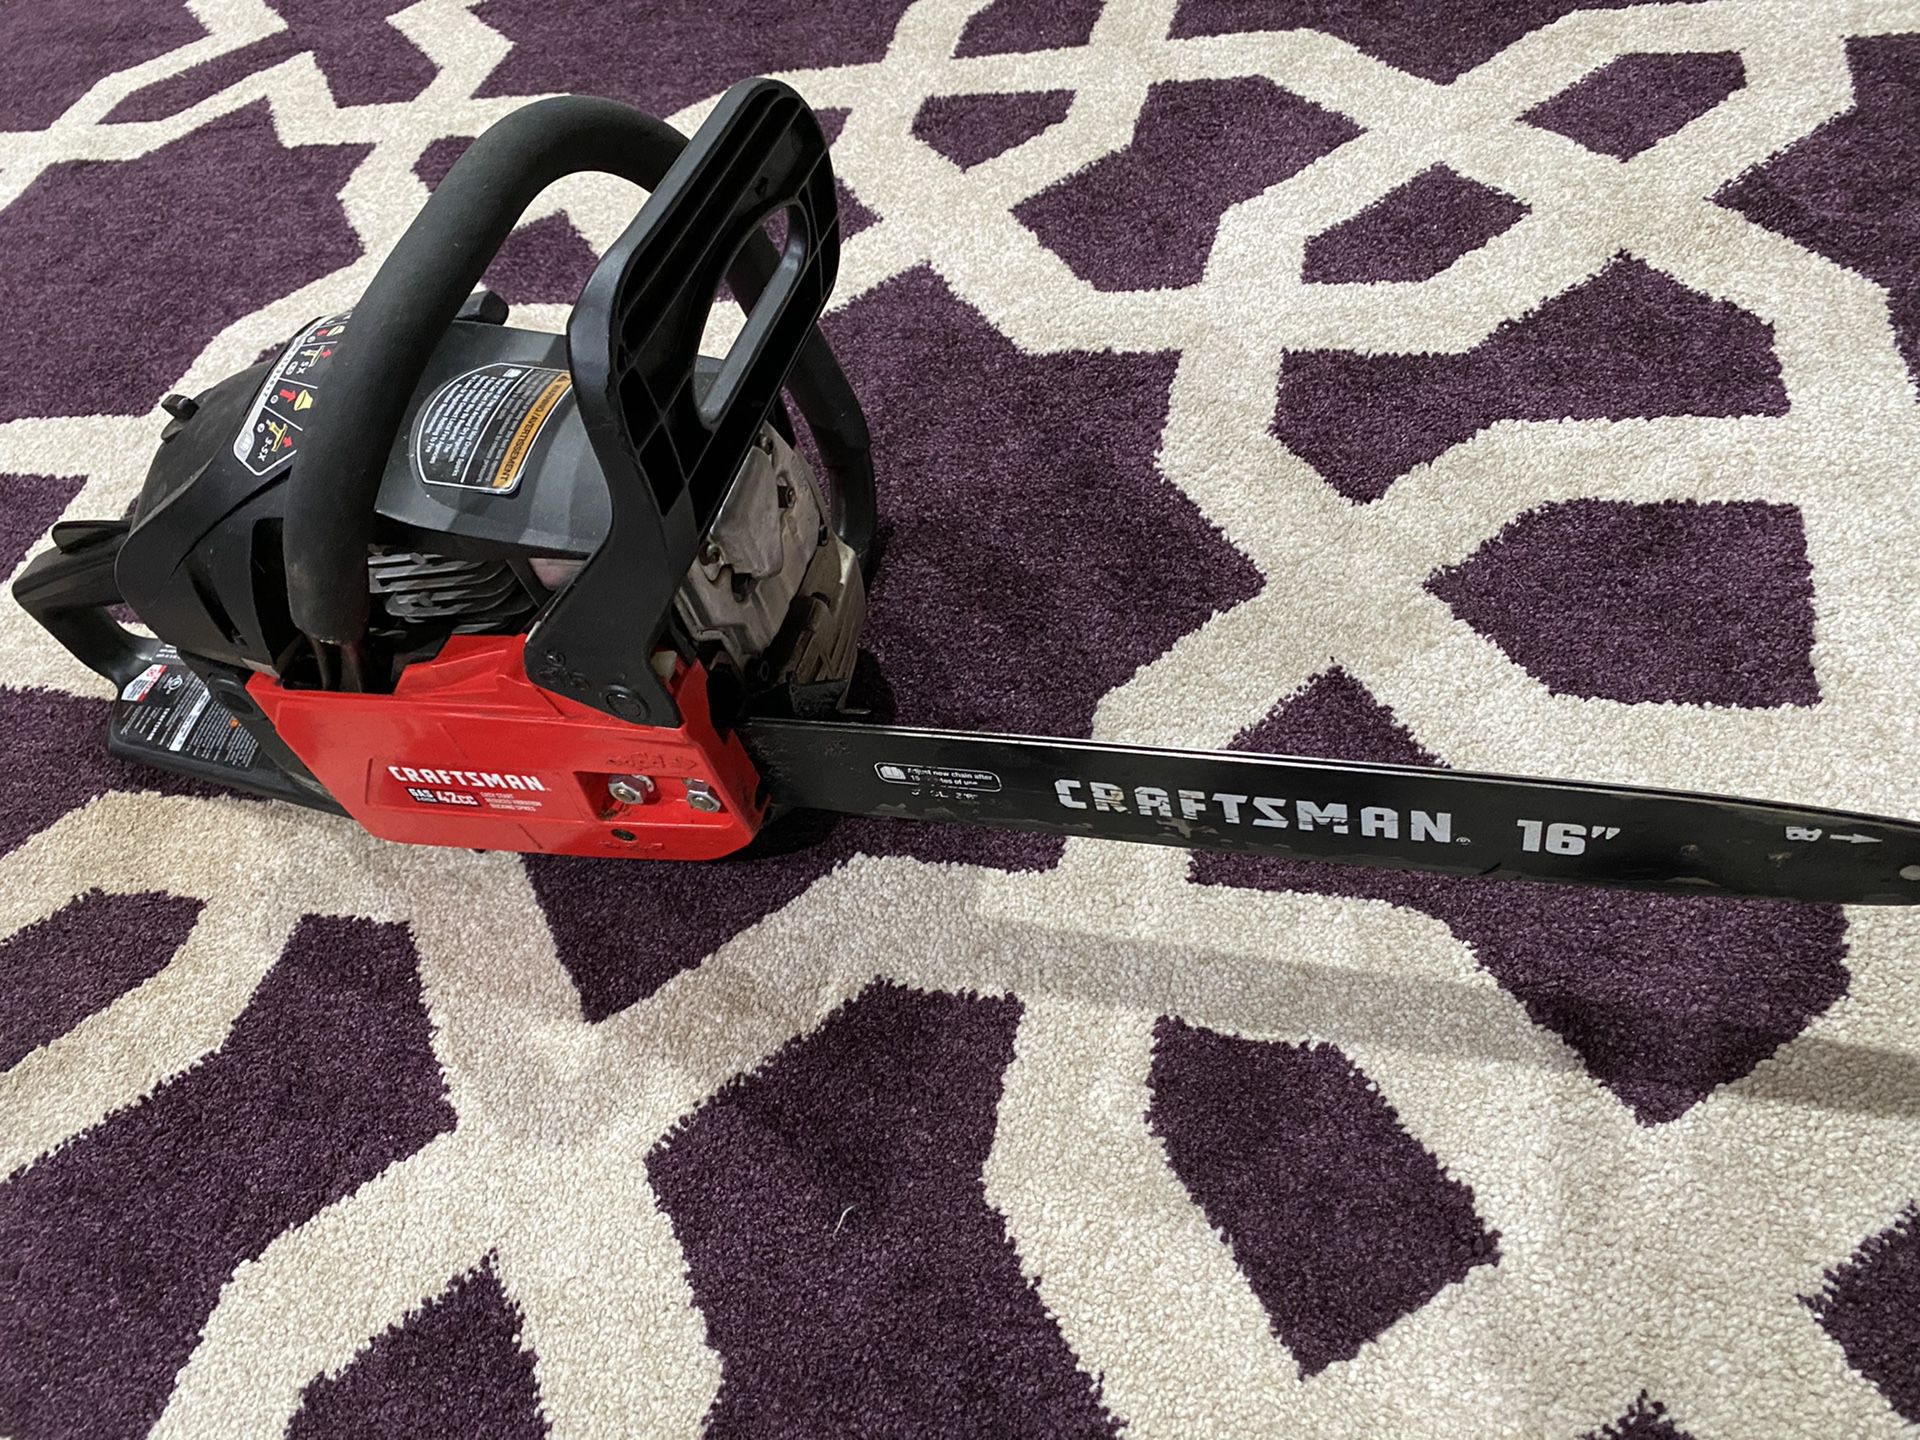 Craftsman s145 16-in 42cc 2-cycle gas chainsaw